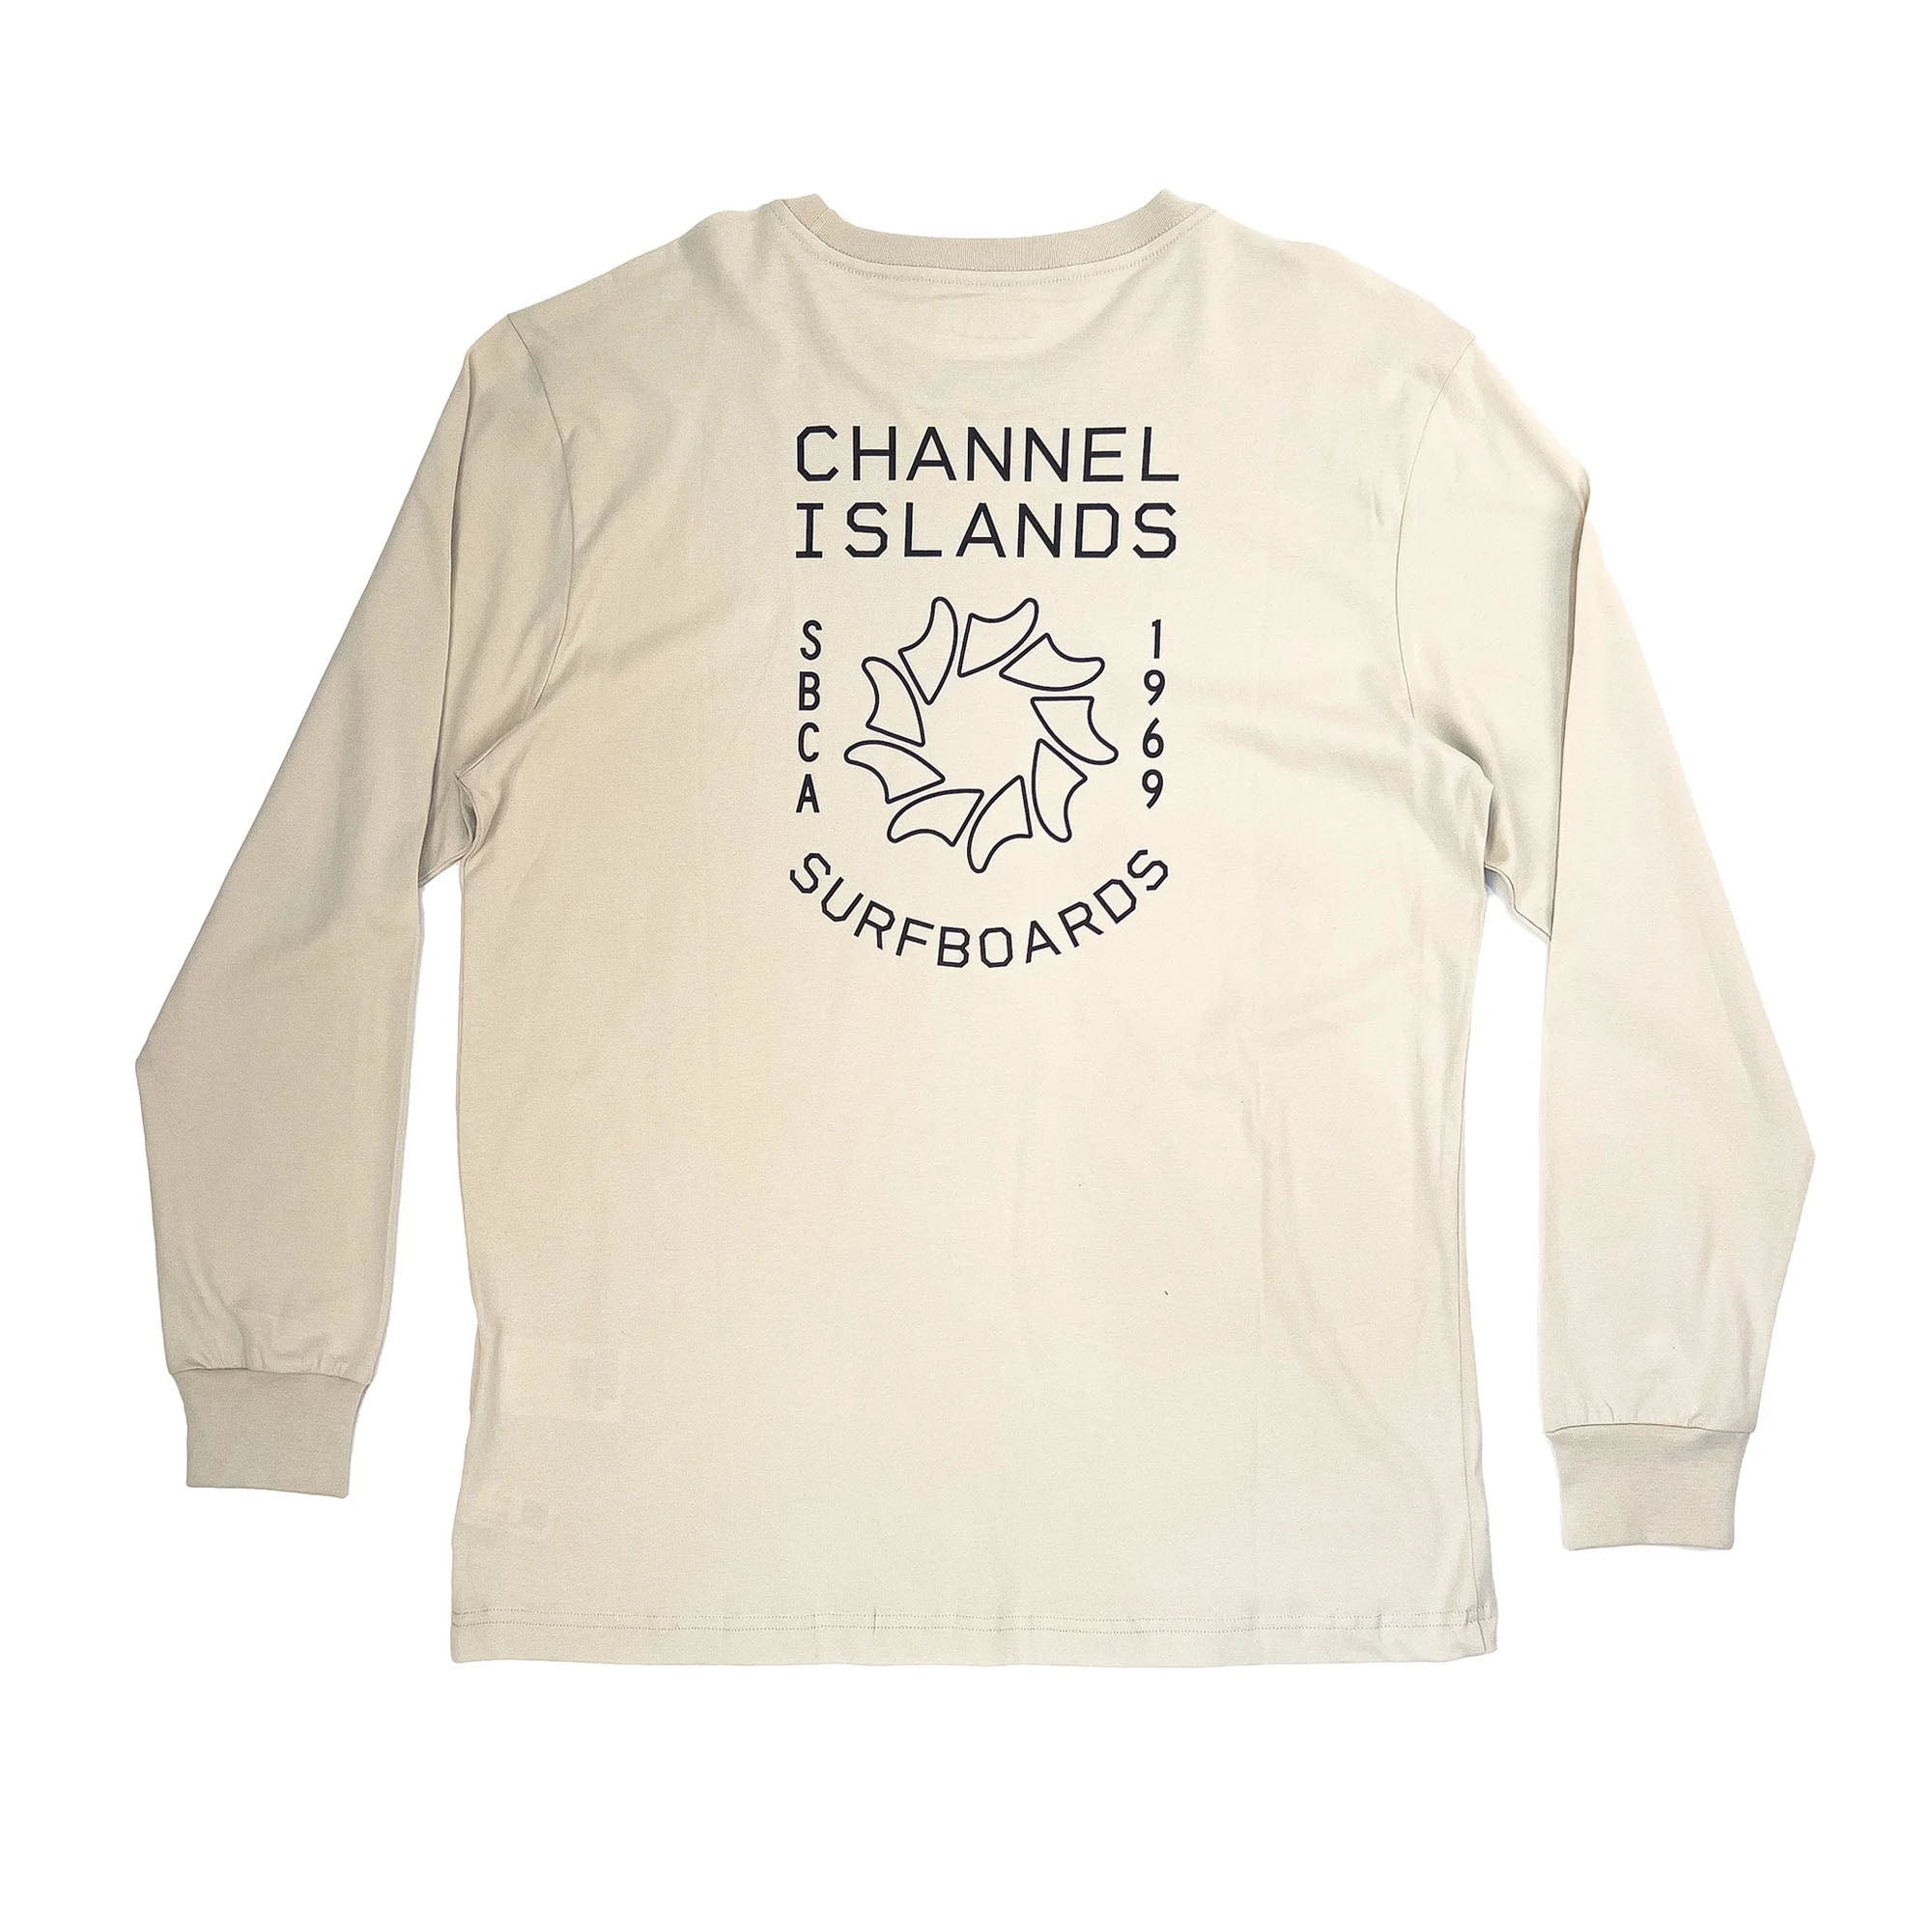 Channel Islands Spin Fin Crew Youth Boy's L/S Shirt